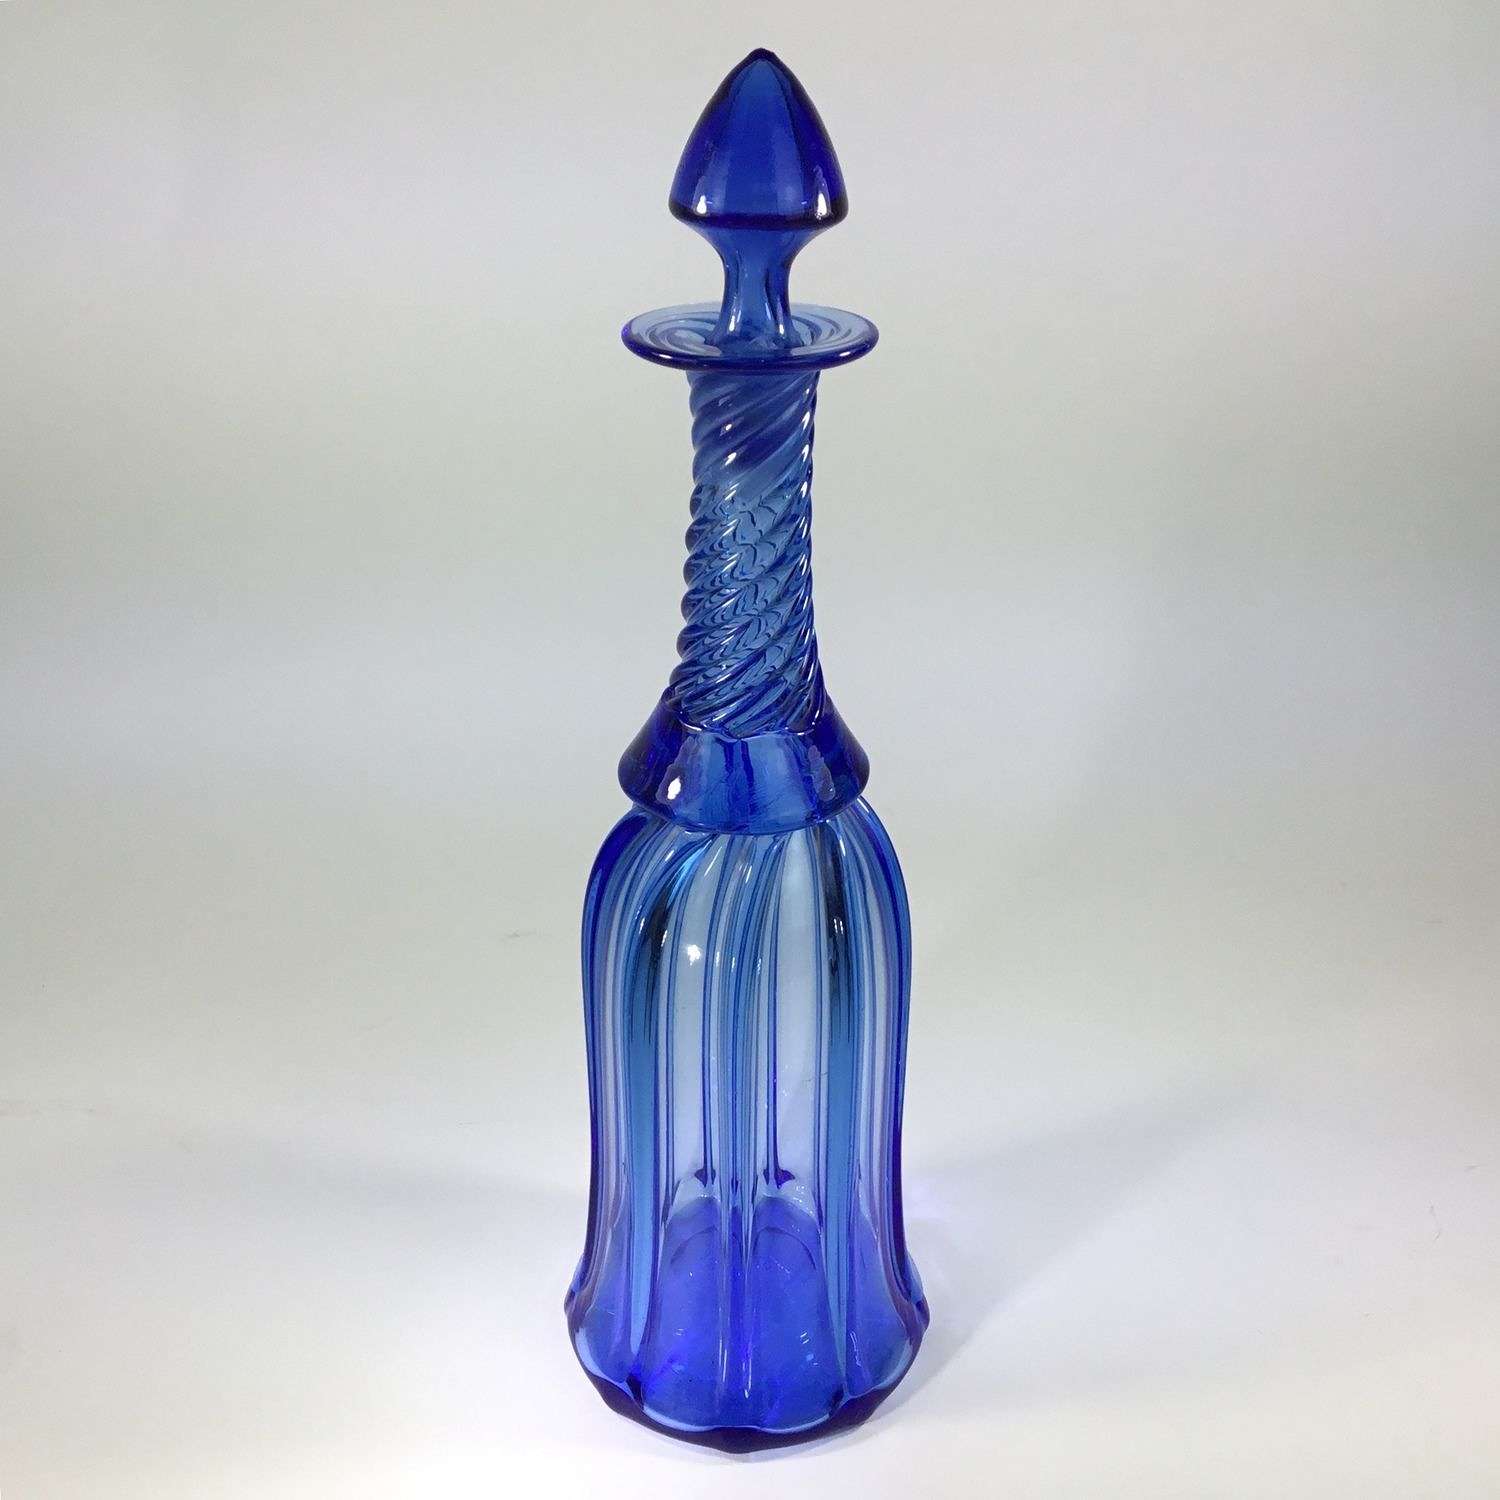 Exceptional 19th Century wrythen glass decanter